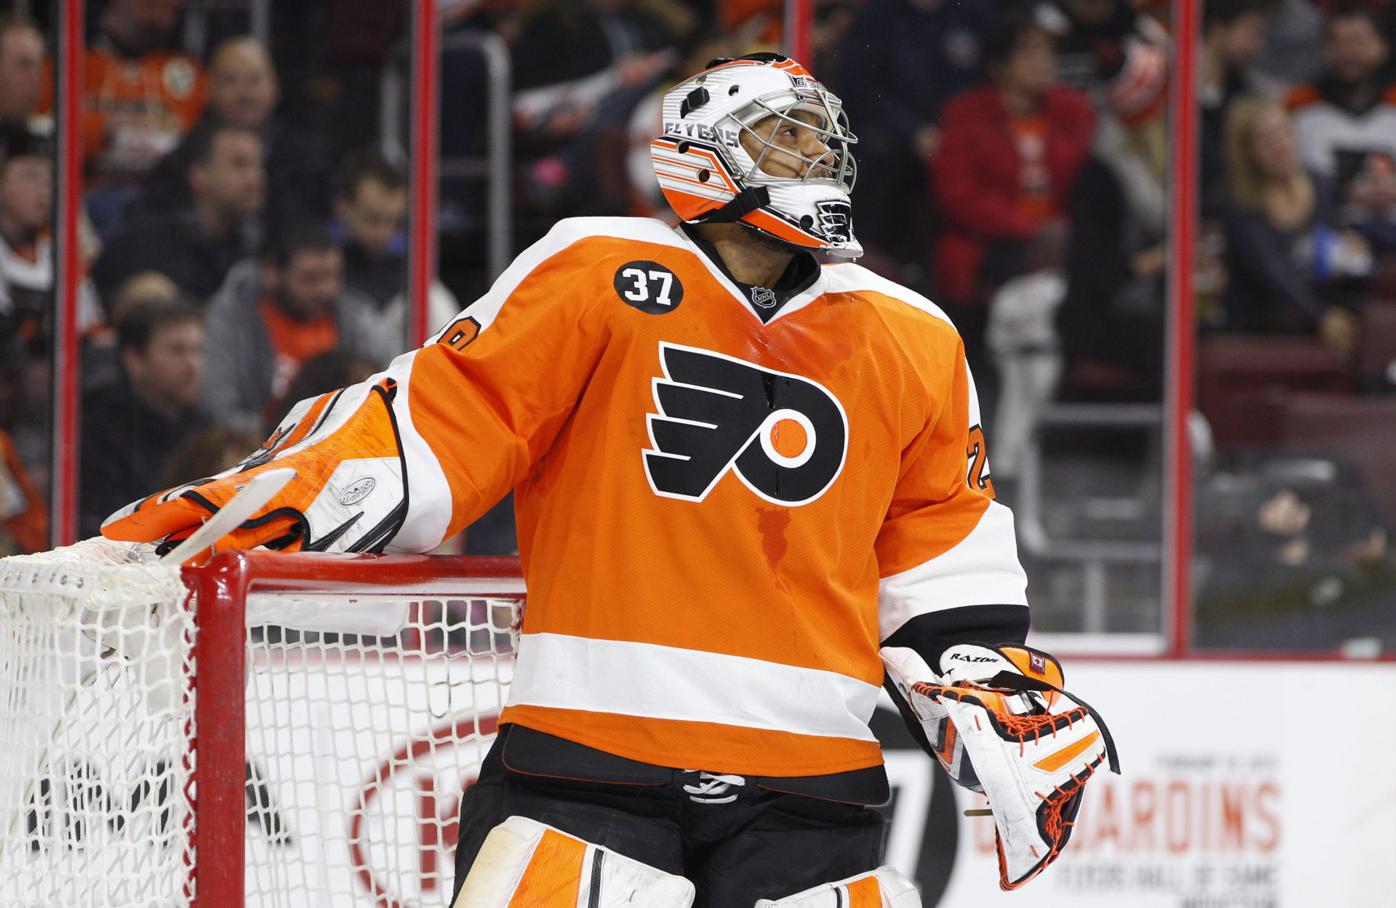 Former NHL goalie Ray Emery drowns at age 35